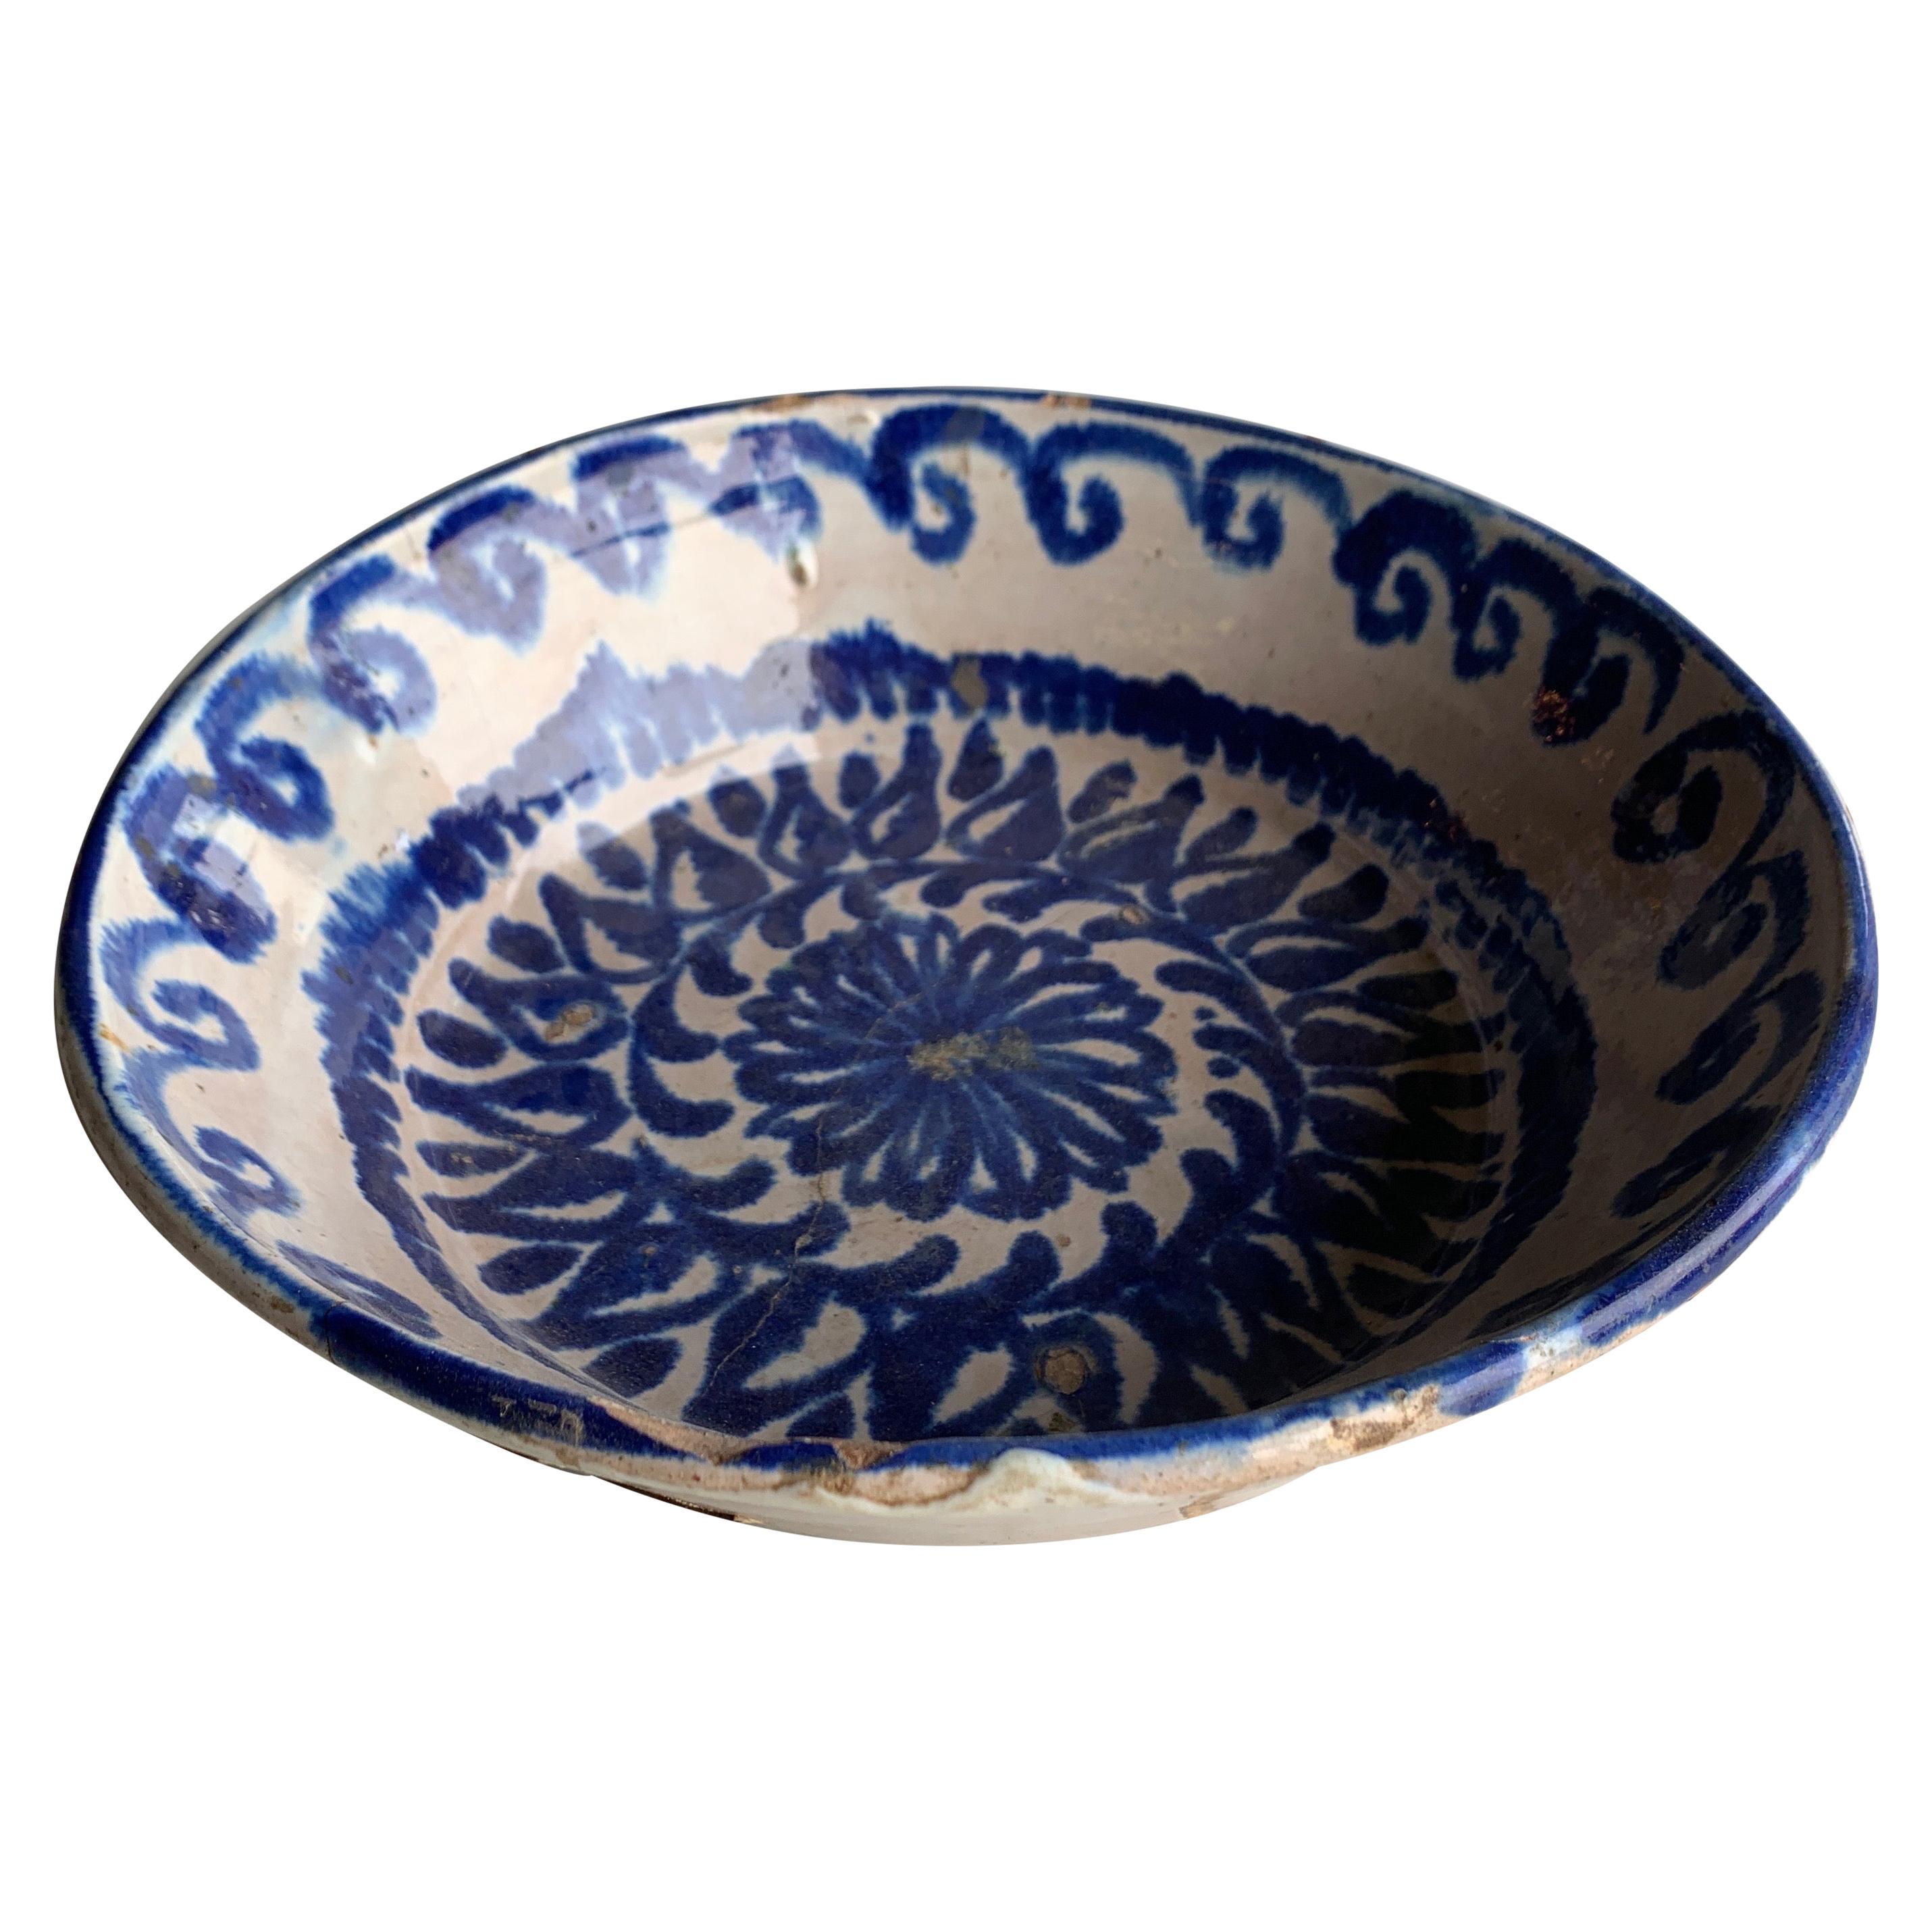 19th Century Spanish Blue and White Pattern Bowl with Original Staples